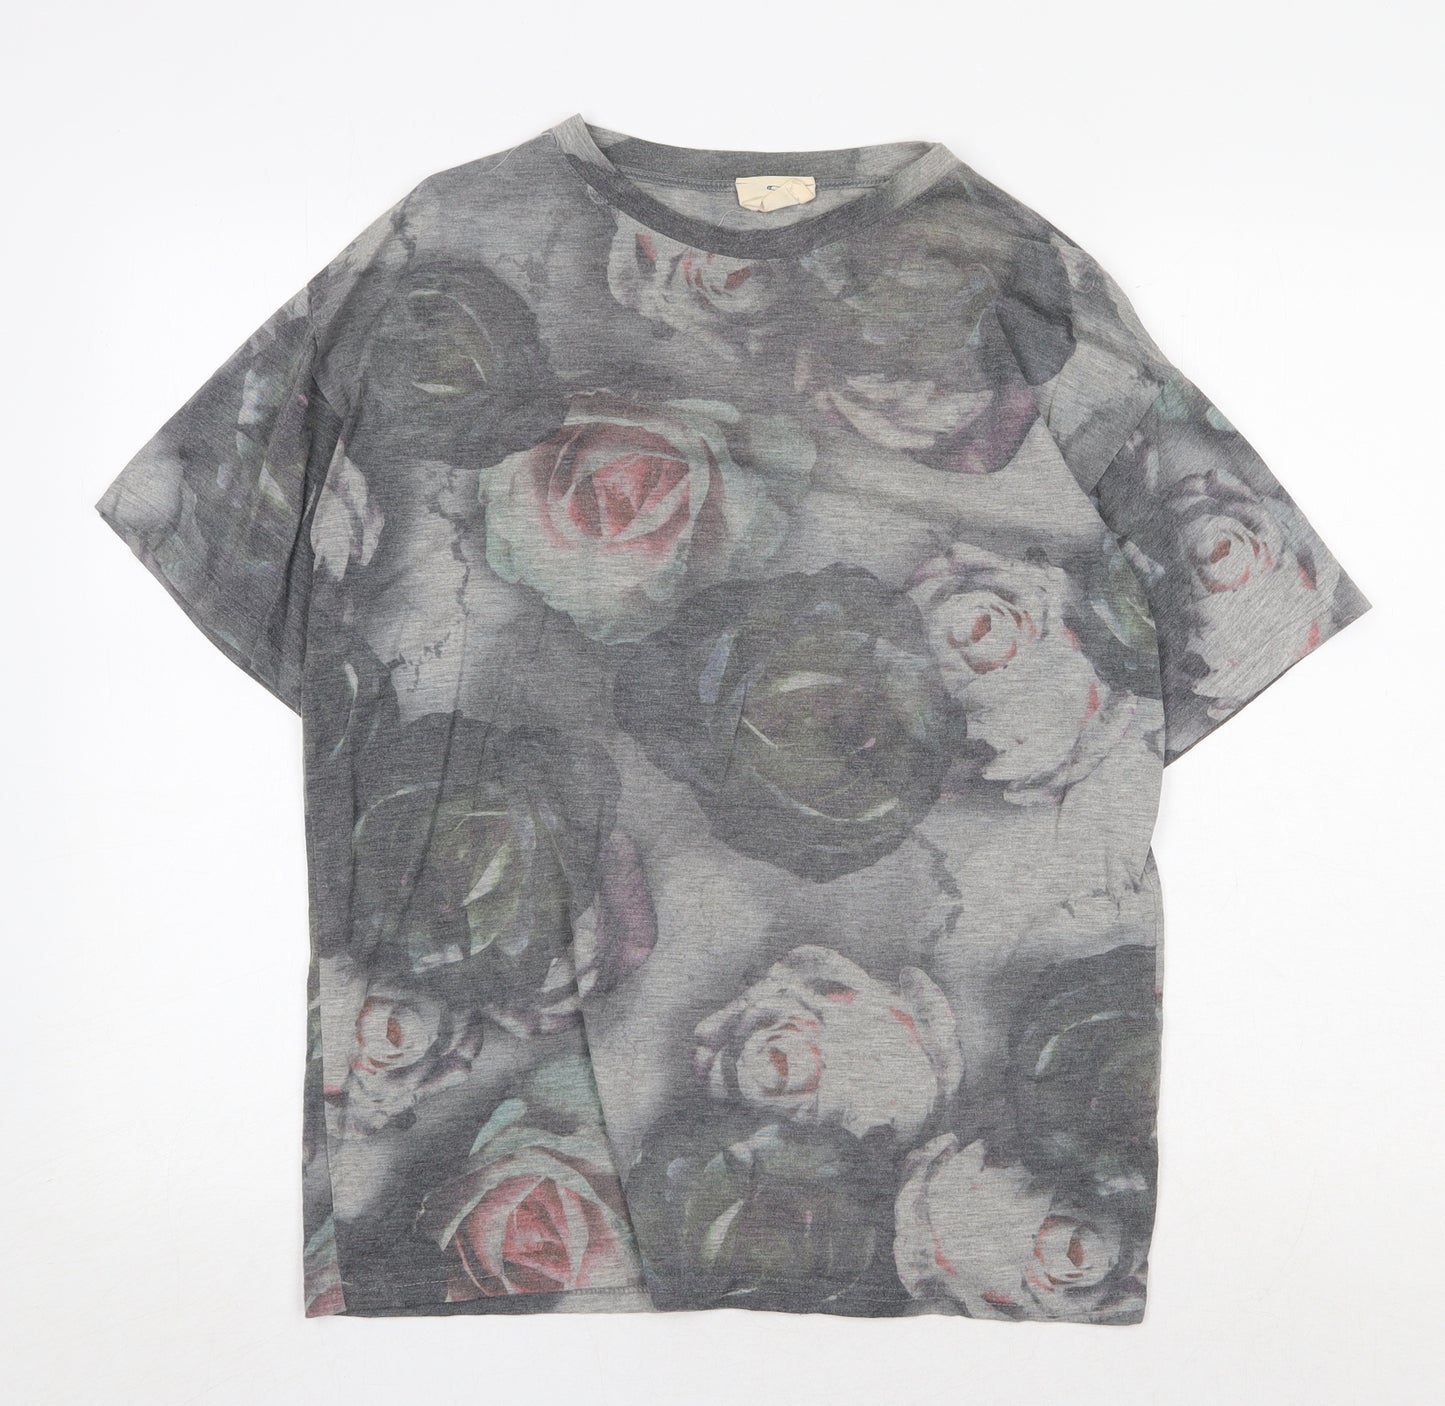 Pins & Needles Womens Grey Floral Polyester Basic T-Shirt Size S Round Neck - Roses